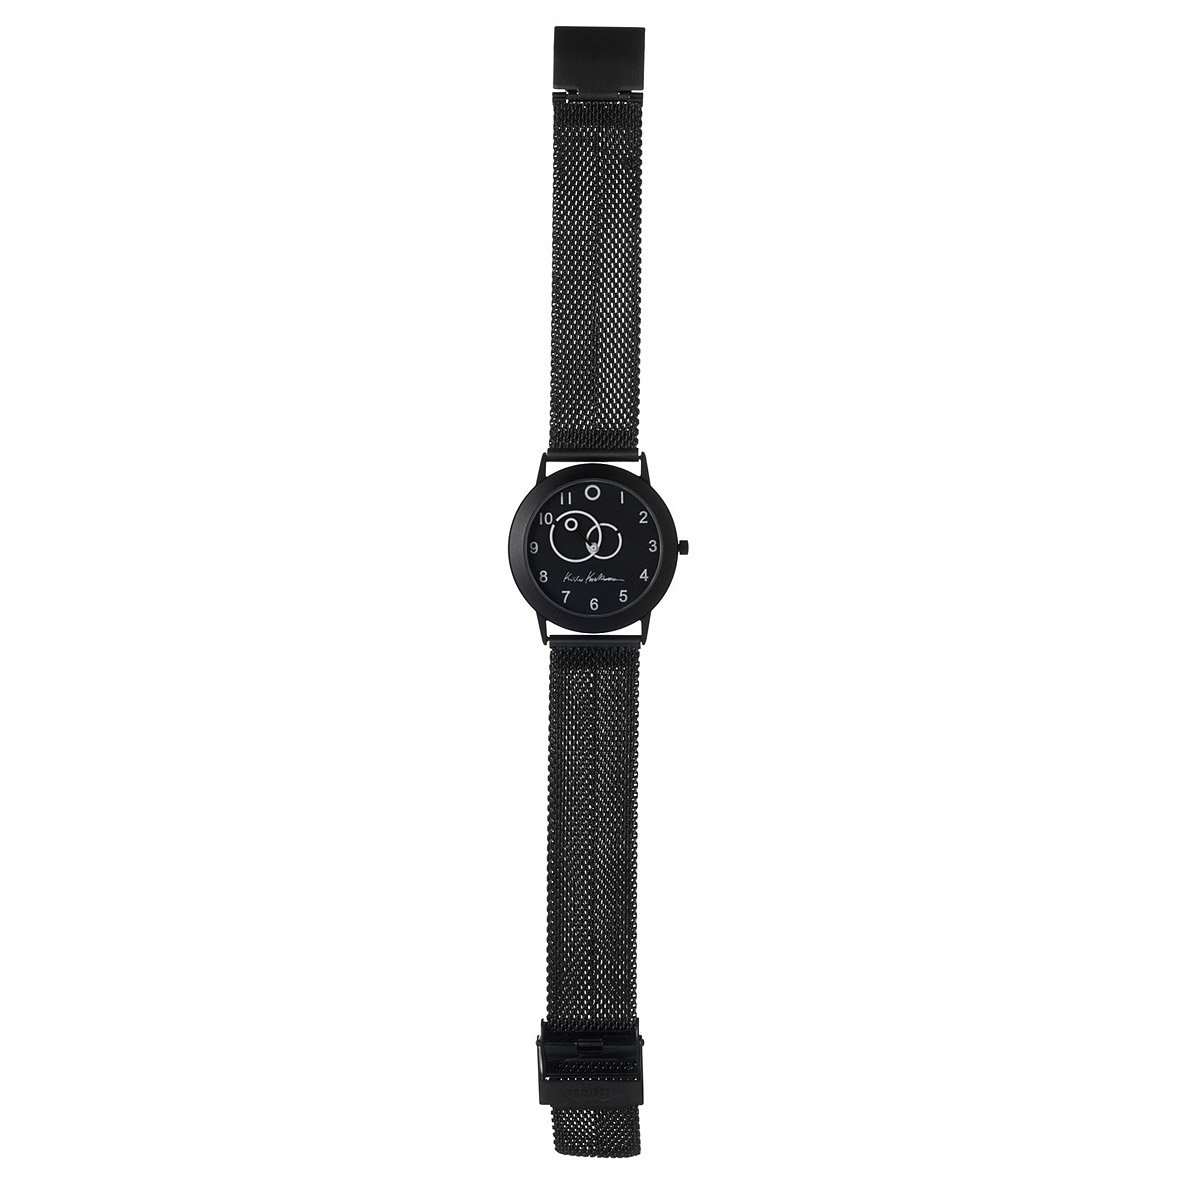 Cosmos Watch | Architecturally inspired, black and white timepiece ...